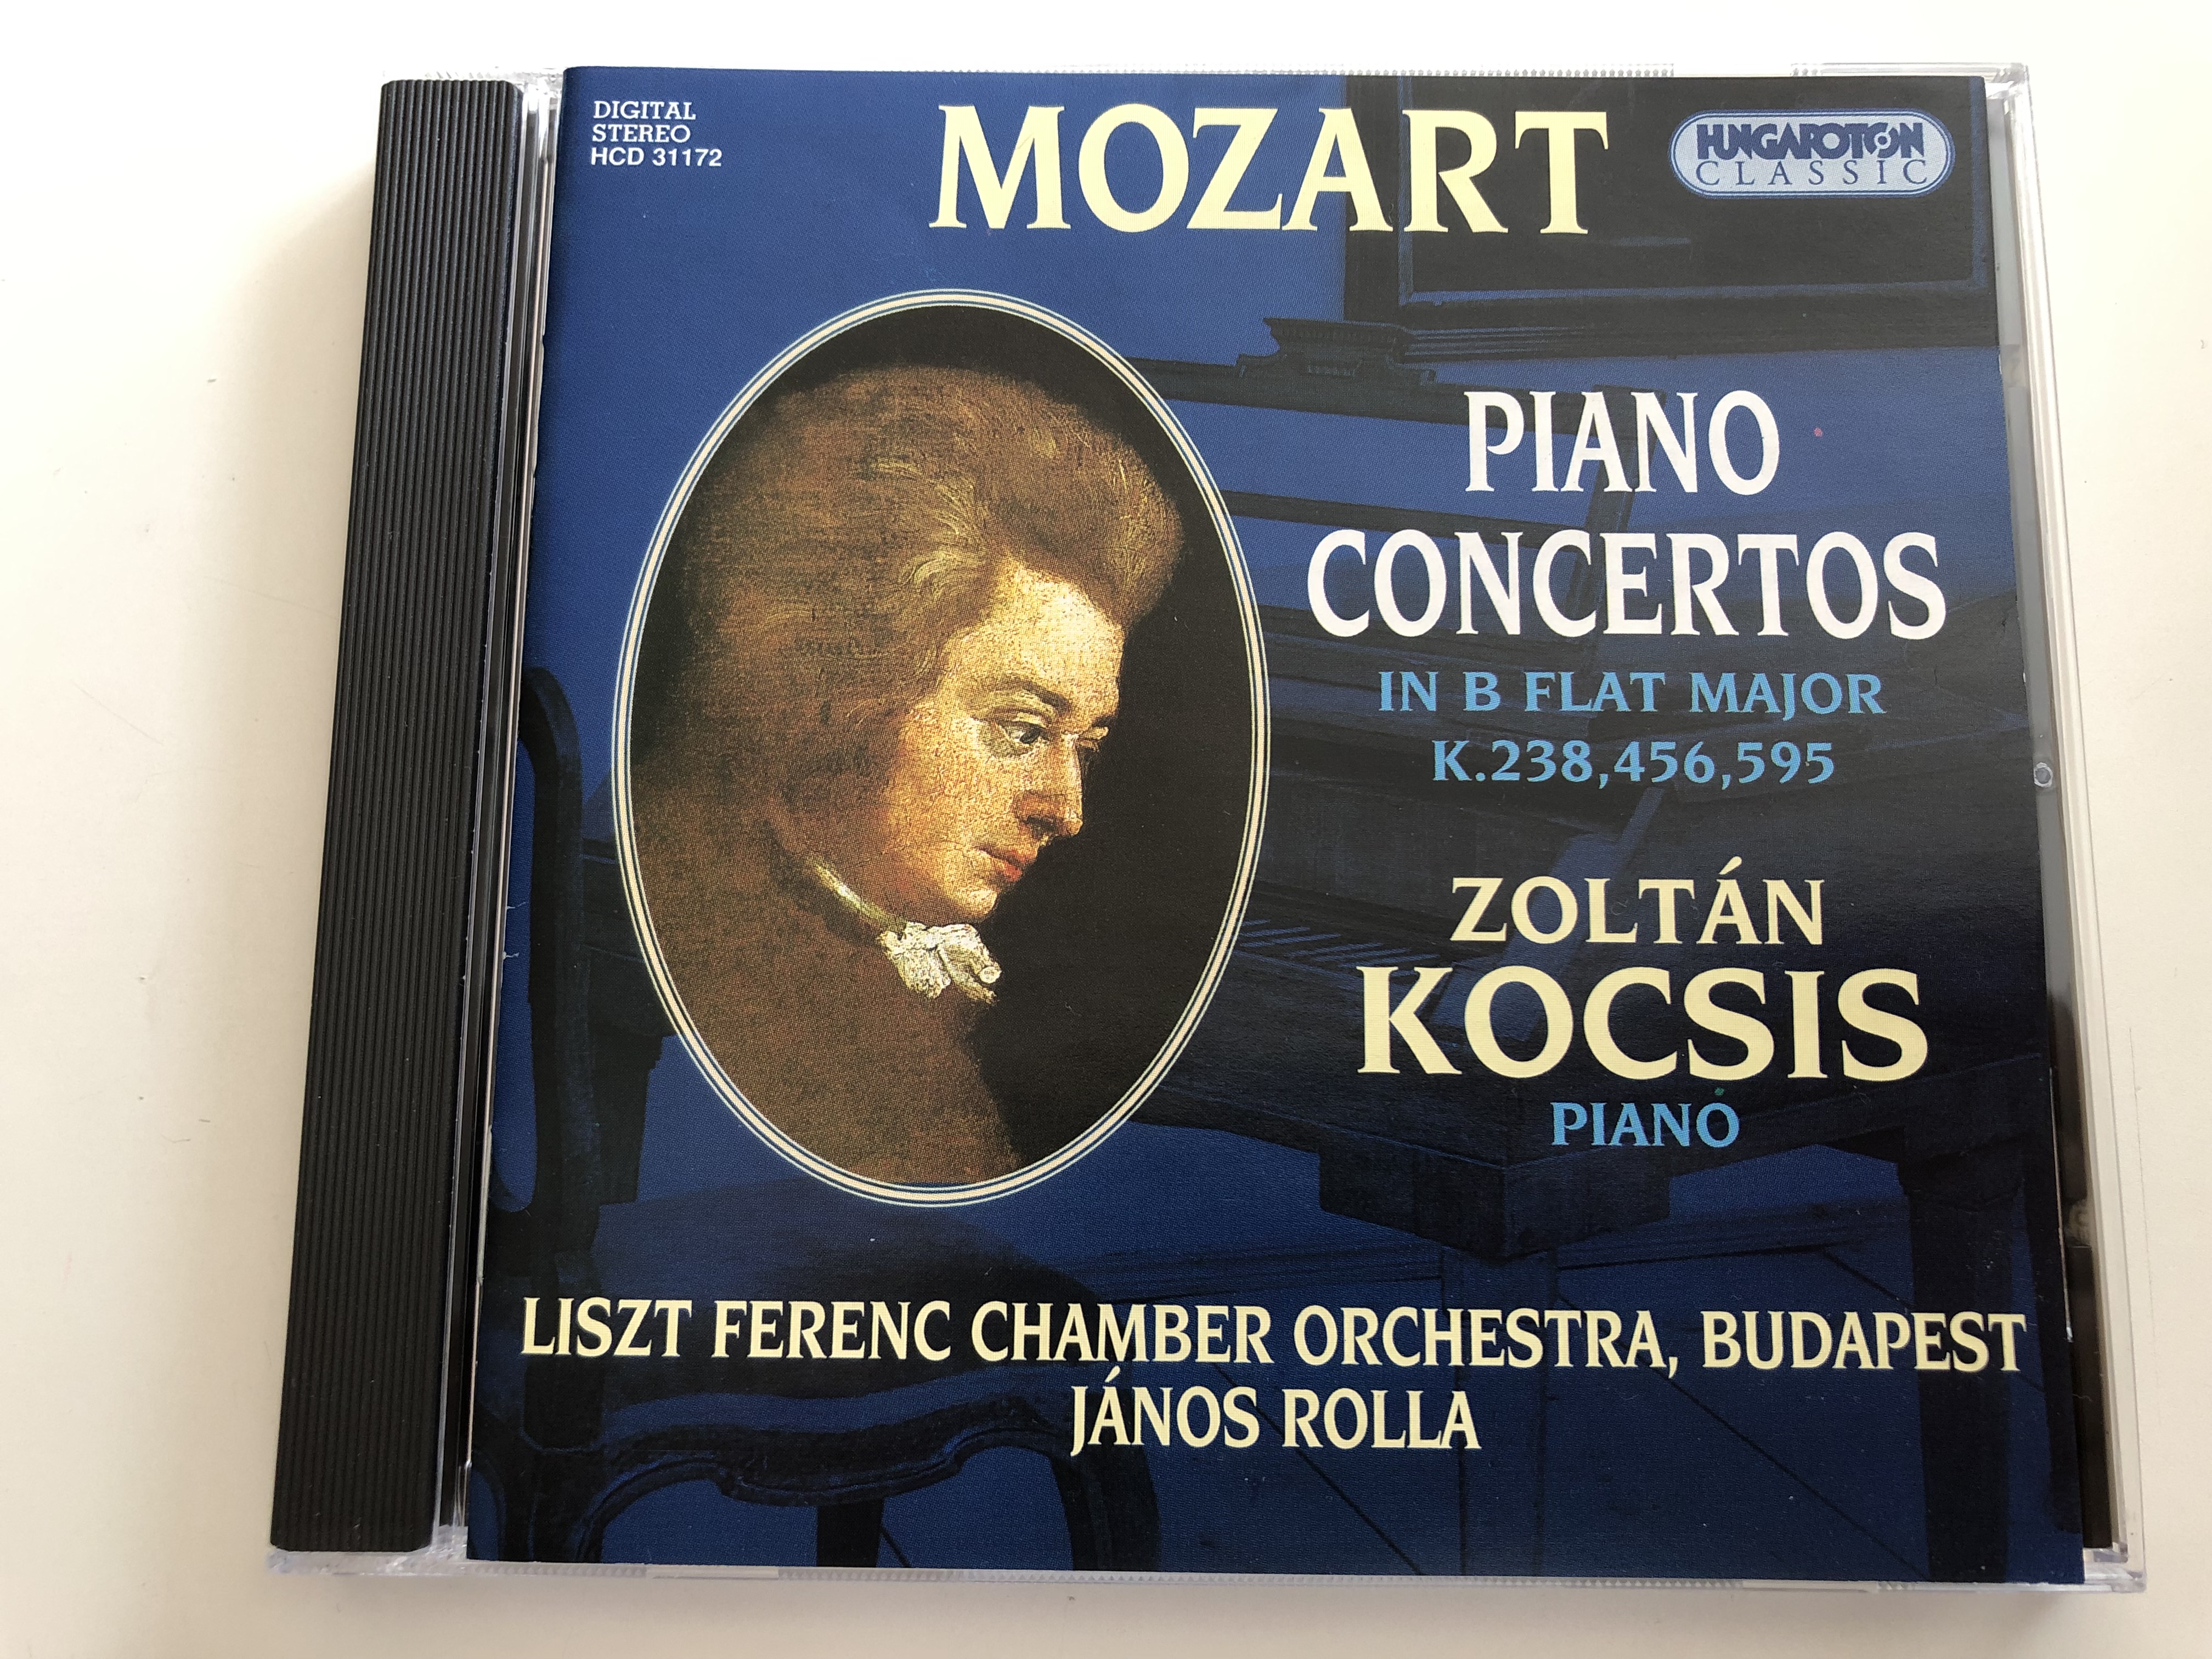 mozart-piano-concertos-in-b-flat-major-k.238-456-595-zolt-n-kocsis-piano-liszt-ferenc-chamber-orchestra-budapest-conducted-by-j-nos-rolla-hungaroton-classic-audio-cd-1996-hcd-31172-1-.jpg